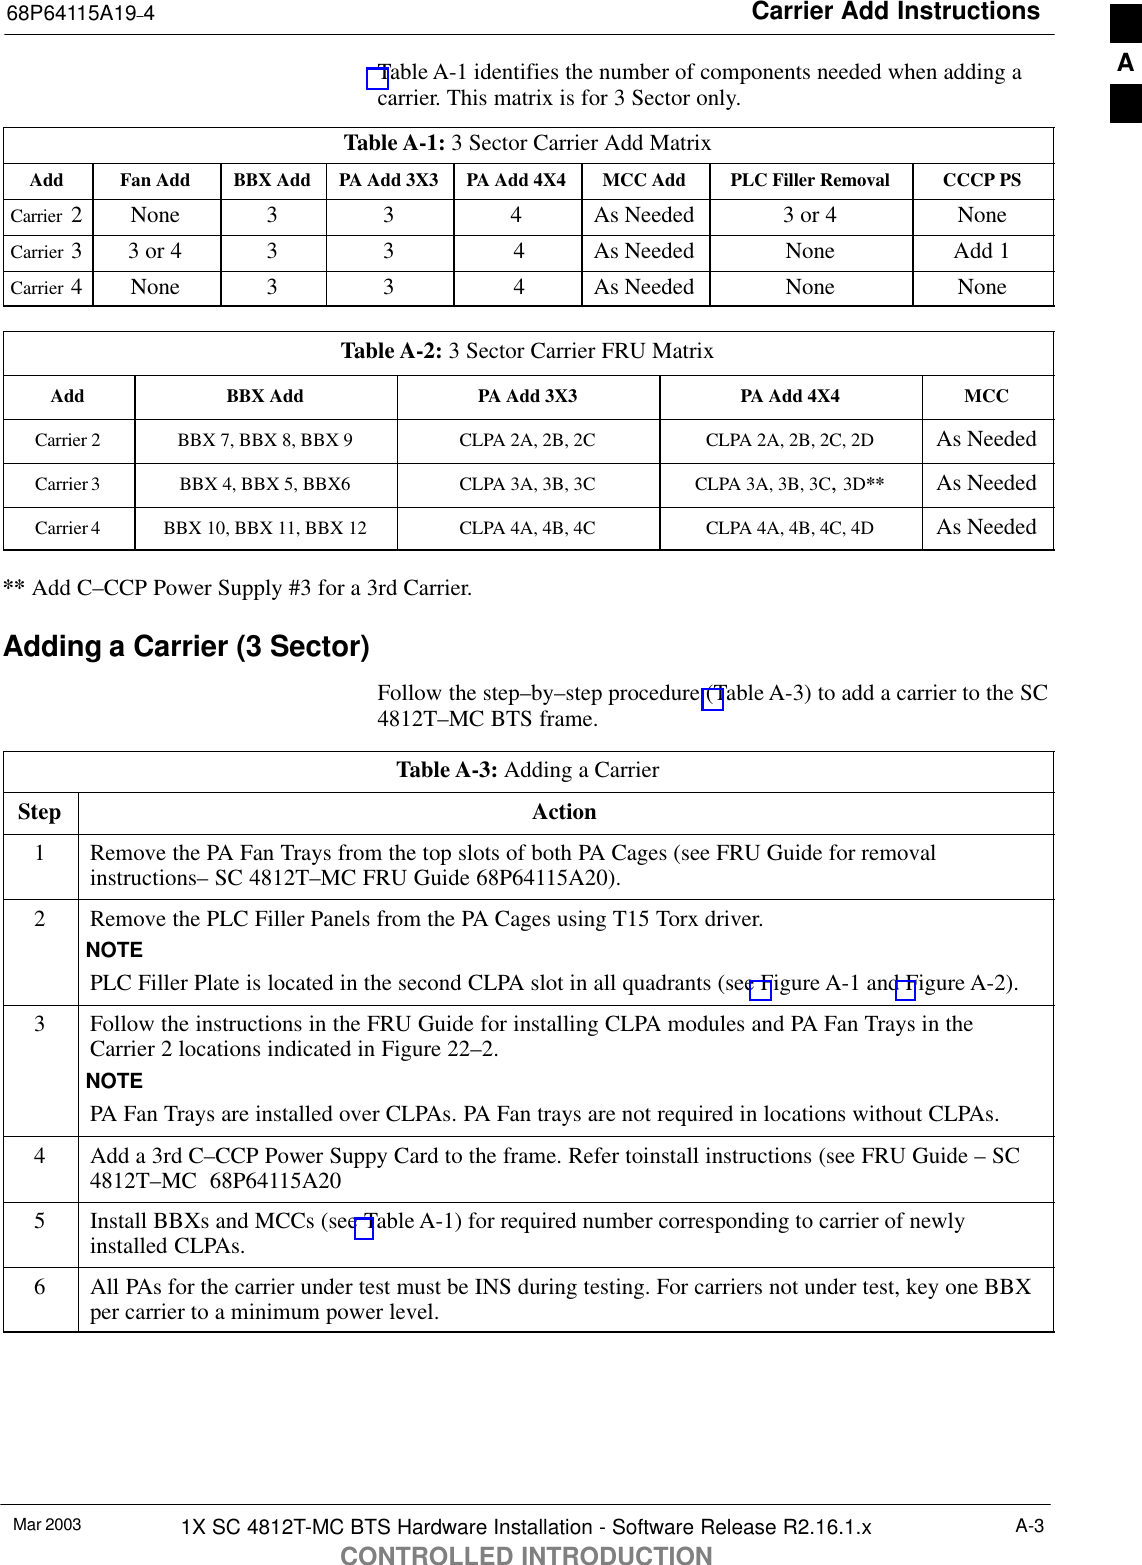 Carrier Add Instructions68P64115A19–4Mar 2003 1X SC 4812T-MC BTS Hardware Installation - Software Release R2.16.1.xCONTROLLED INTRODUCTIONA-3Table A-1 identifies the number of components needed when adding acarrier. This matrix is for 3 Sector only.Table A-1: 3 Sector Carrier Add MatrixAdd Fan Add BBX Add PA Add 3X3 PA Add 4X4 MCC Add PLC Filler Removal CCCP PSCarrier  2 None 3 3 4 As Needed 3 or 4 NoneCarrier  33 or 4 3 3  4 As Needed None Add 1Carrier  4 None 3 3  4 As Needed None NoneTable A-2: 3 Sector Carrier FRU MatrixAdd BBX Add PA Add 3X3 PA Add 4X4 MCCCarrier 2 BBX 7, BBX 8, BBX 9 CLPA 2A, 2B, 2C CLPA 2A, 2B, 2C, 2D As NeededCarrier 3 BBX 4, BBX 5, BBX6 CLPA 3A, 3B, 3C CLPA 3A, 3B, 3C, 3D** As NeededCarrier 4 BBX 10, BBX 11, BBX 12 CLPA 4A, 4B, 4C CLPA 4A, 4B, 4C, 4D As Needed** Add C–CCP Power Supply #3 for a 3rd Carrier.Adding a Carrier (3 Sector)Follow the step–by–step procedure (Table A-3) to add a carrier to the SC4812T–MC BTS frame.Table A-3: Adding a CarrierStep Action1Remove the PA Fan Trays from the top slots of both PA Cages (see FRU Guide for removalinstructions– SC 4812T–MC FRU Guide 68P64115A20).2Remove the PLC Filler Panels from the PA Cages using T15 Torx driver.NOTEPLC Filler Plate is located in the second CLPA slot in all quadrants (see Figure A-1 and Figure A-2).3Follow the instructions in the FRU Guide for installing CLPA modules and PA Fan Trays in theCarrier 2 locations indicated in Figure 22–2.NOTEPA Fan Trays are installed over CLPAs. PA Fan trays are not required in locations without CLPAs.4Add a 3rd C–CCP Power Suppy Card to the frame. Refer toinstall instructions (see FRU Guide – SC4812T–MC  68P64115A205Install BBXs and MCCs (see Table A-1) for required number corresponding to carrier of newlyinstalled CLPAs.6All PAs for the carrier under test must be INS during testing. For carriers not under test, key one BBXper carrier to a minimum power level.A